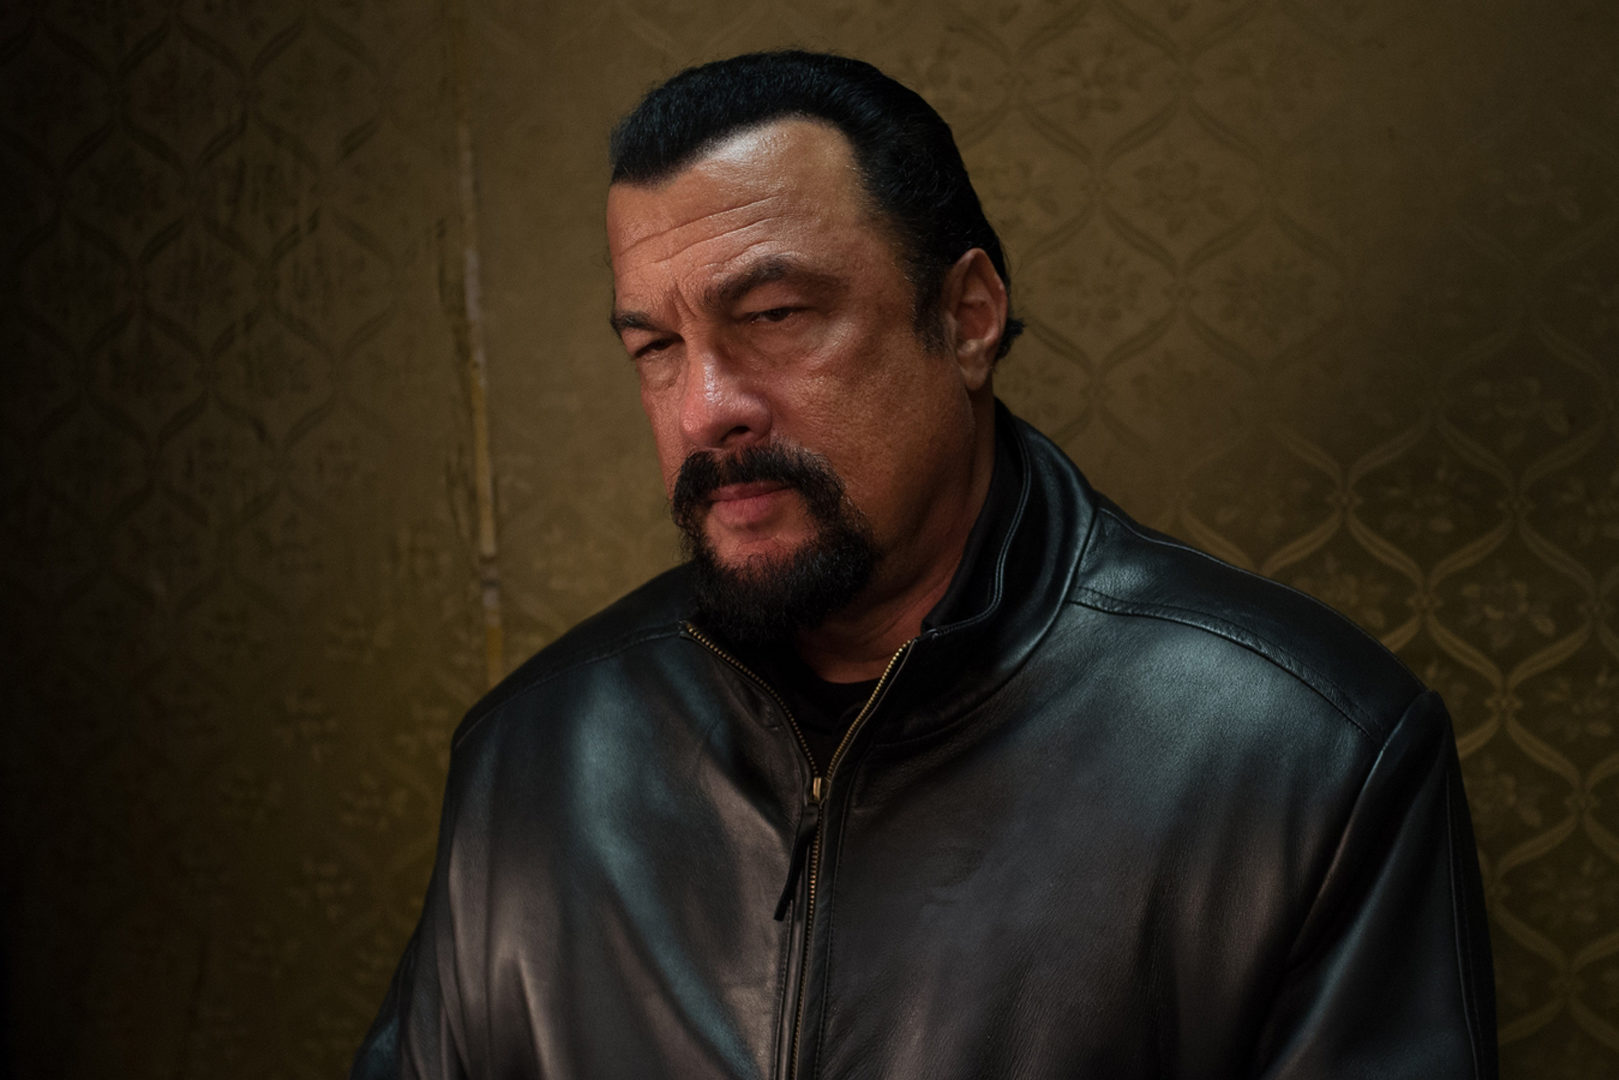 Steven Seagal has been charged with sexual harassment